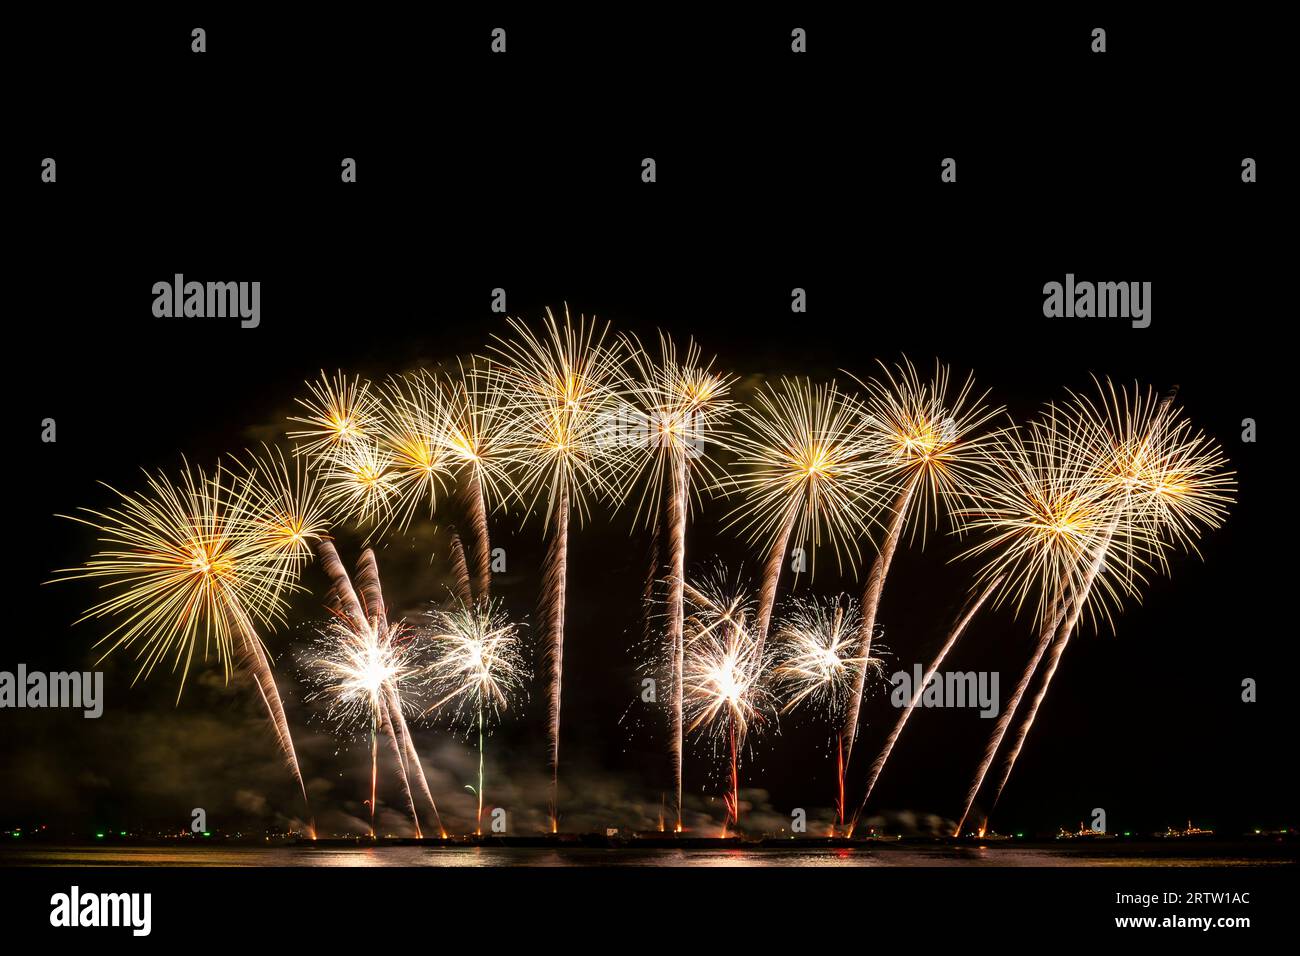 Real Fireworks display celebration, Colorful New Year Firework Stock Photo